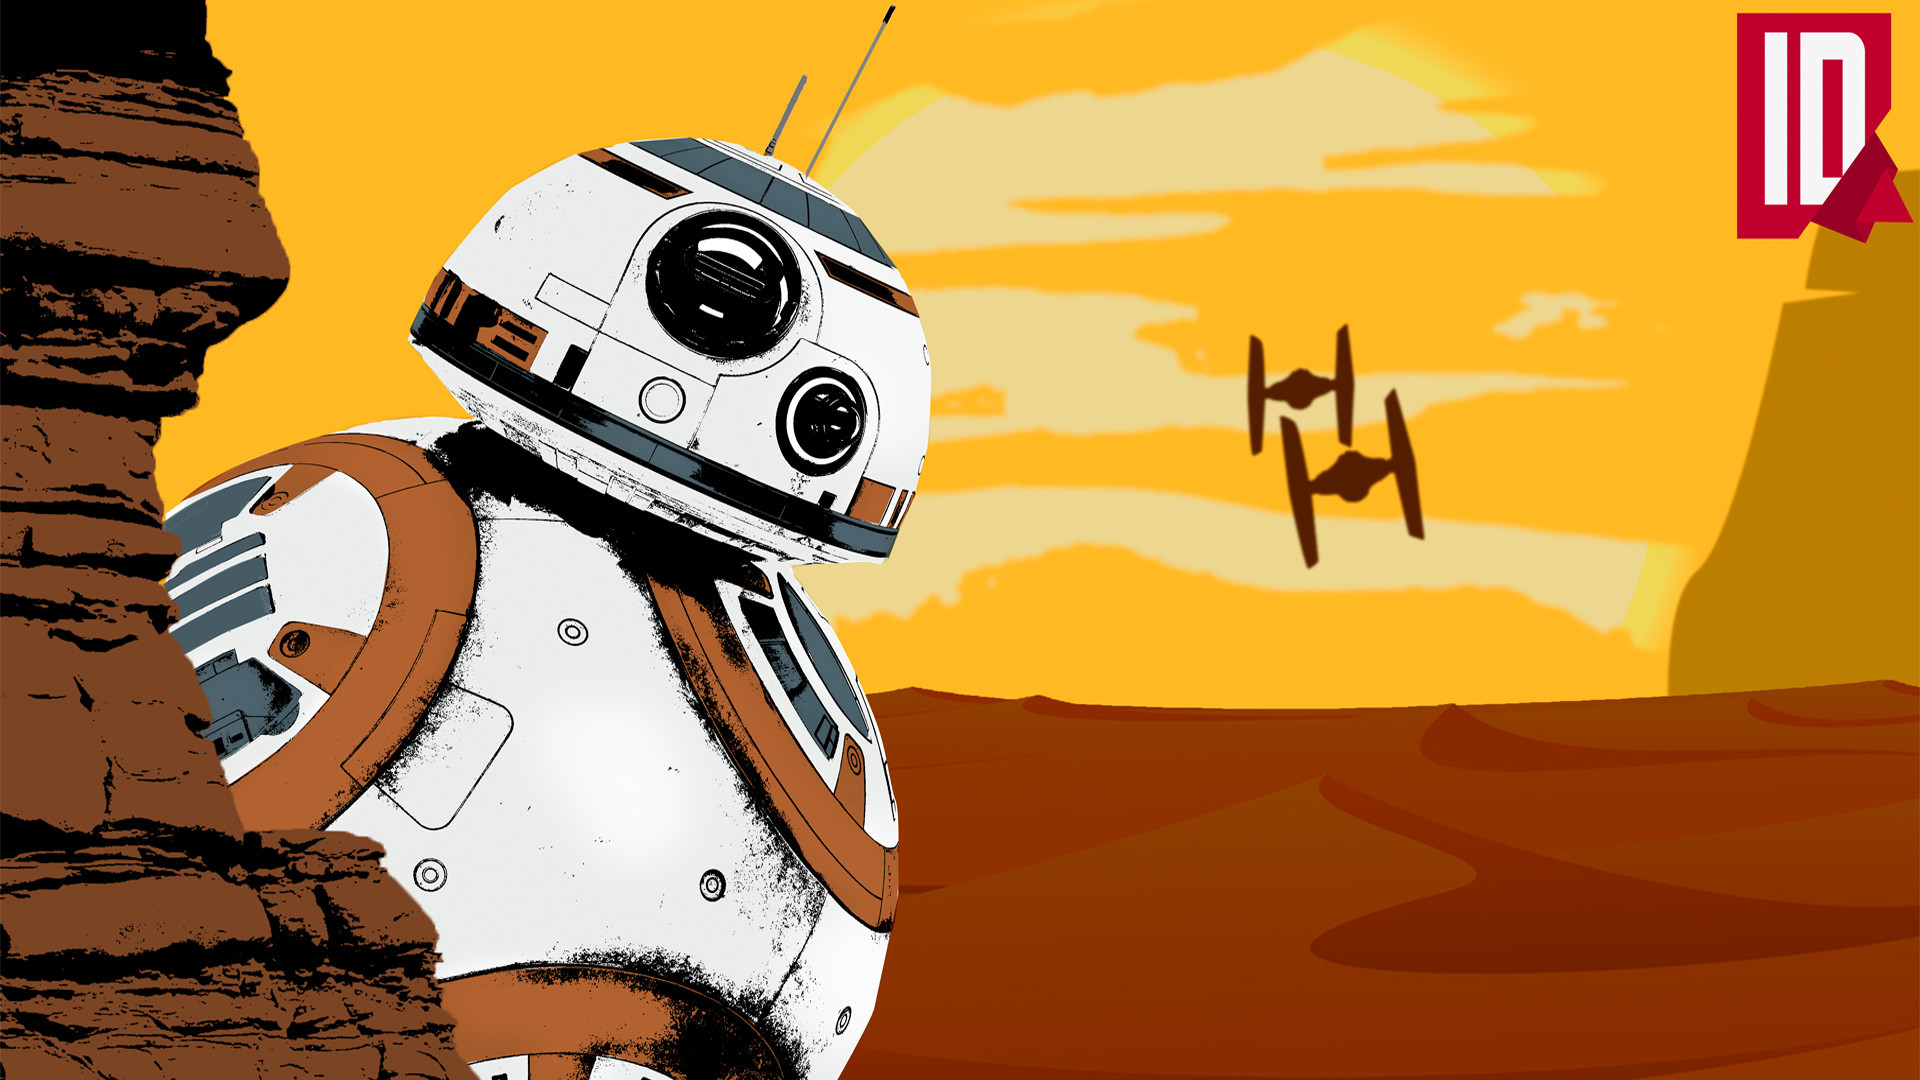 1920x1080 1242x2208 Star Wars The Force Awakens Poe Rey BB8 wallpapers (79 Wallpapers)